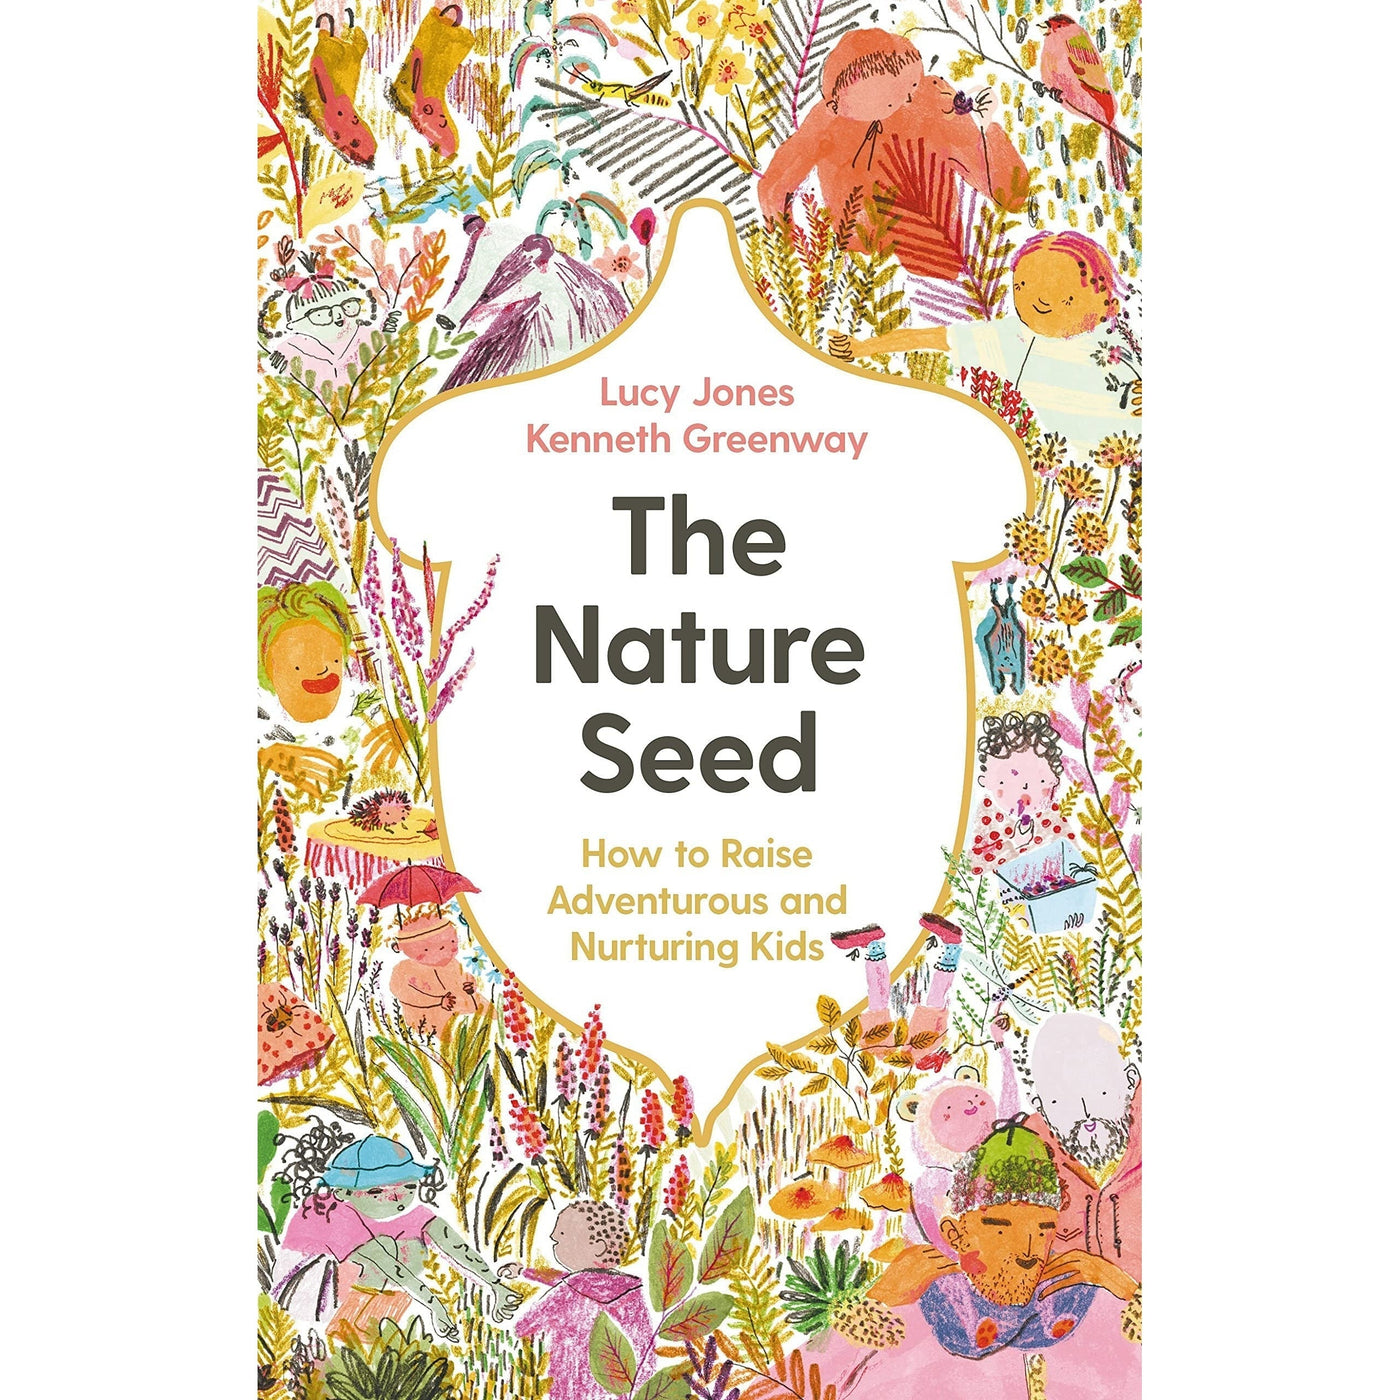 The Nature Seed: How To Raise Adventurous And Nurturing Kids